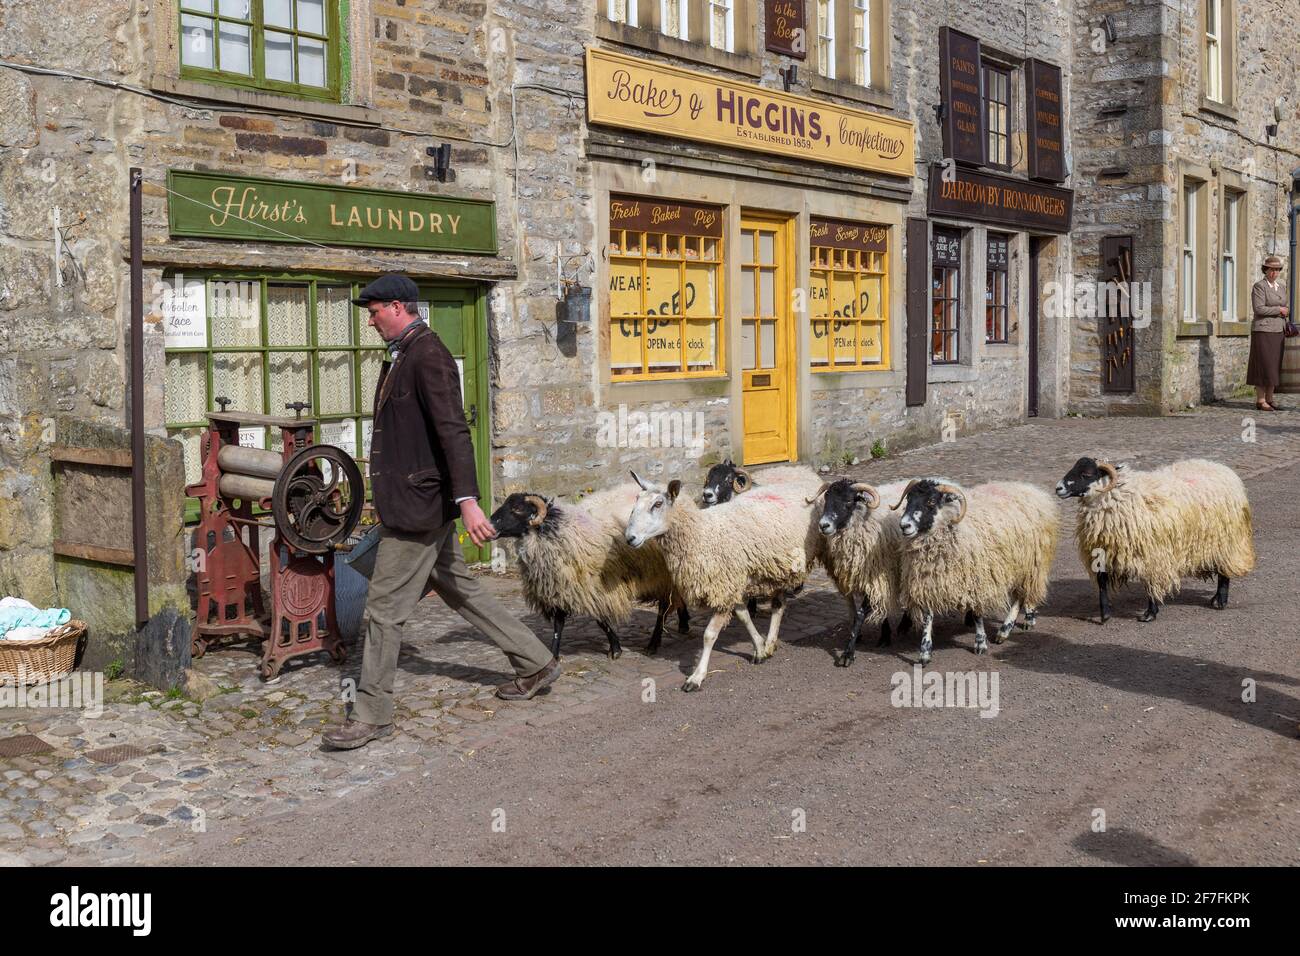 Grassington, UK. 7th April 2021. Filming for the second series of the Channel 5 re-make of All Creatures Great and Small takes place in village of Grassington in the Yorkshire Dales Nation Park. (Credit: Tom Holmes Photography / Alamy Live News) Stock Photo